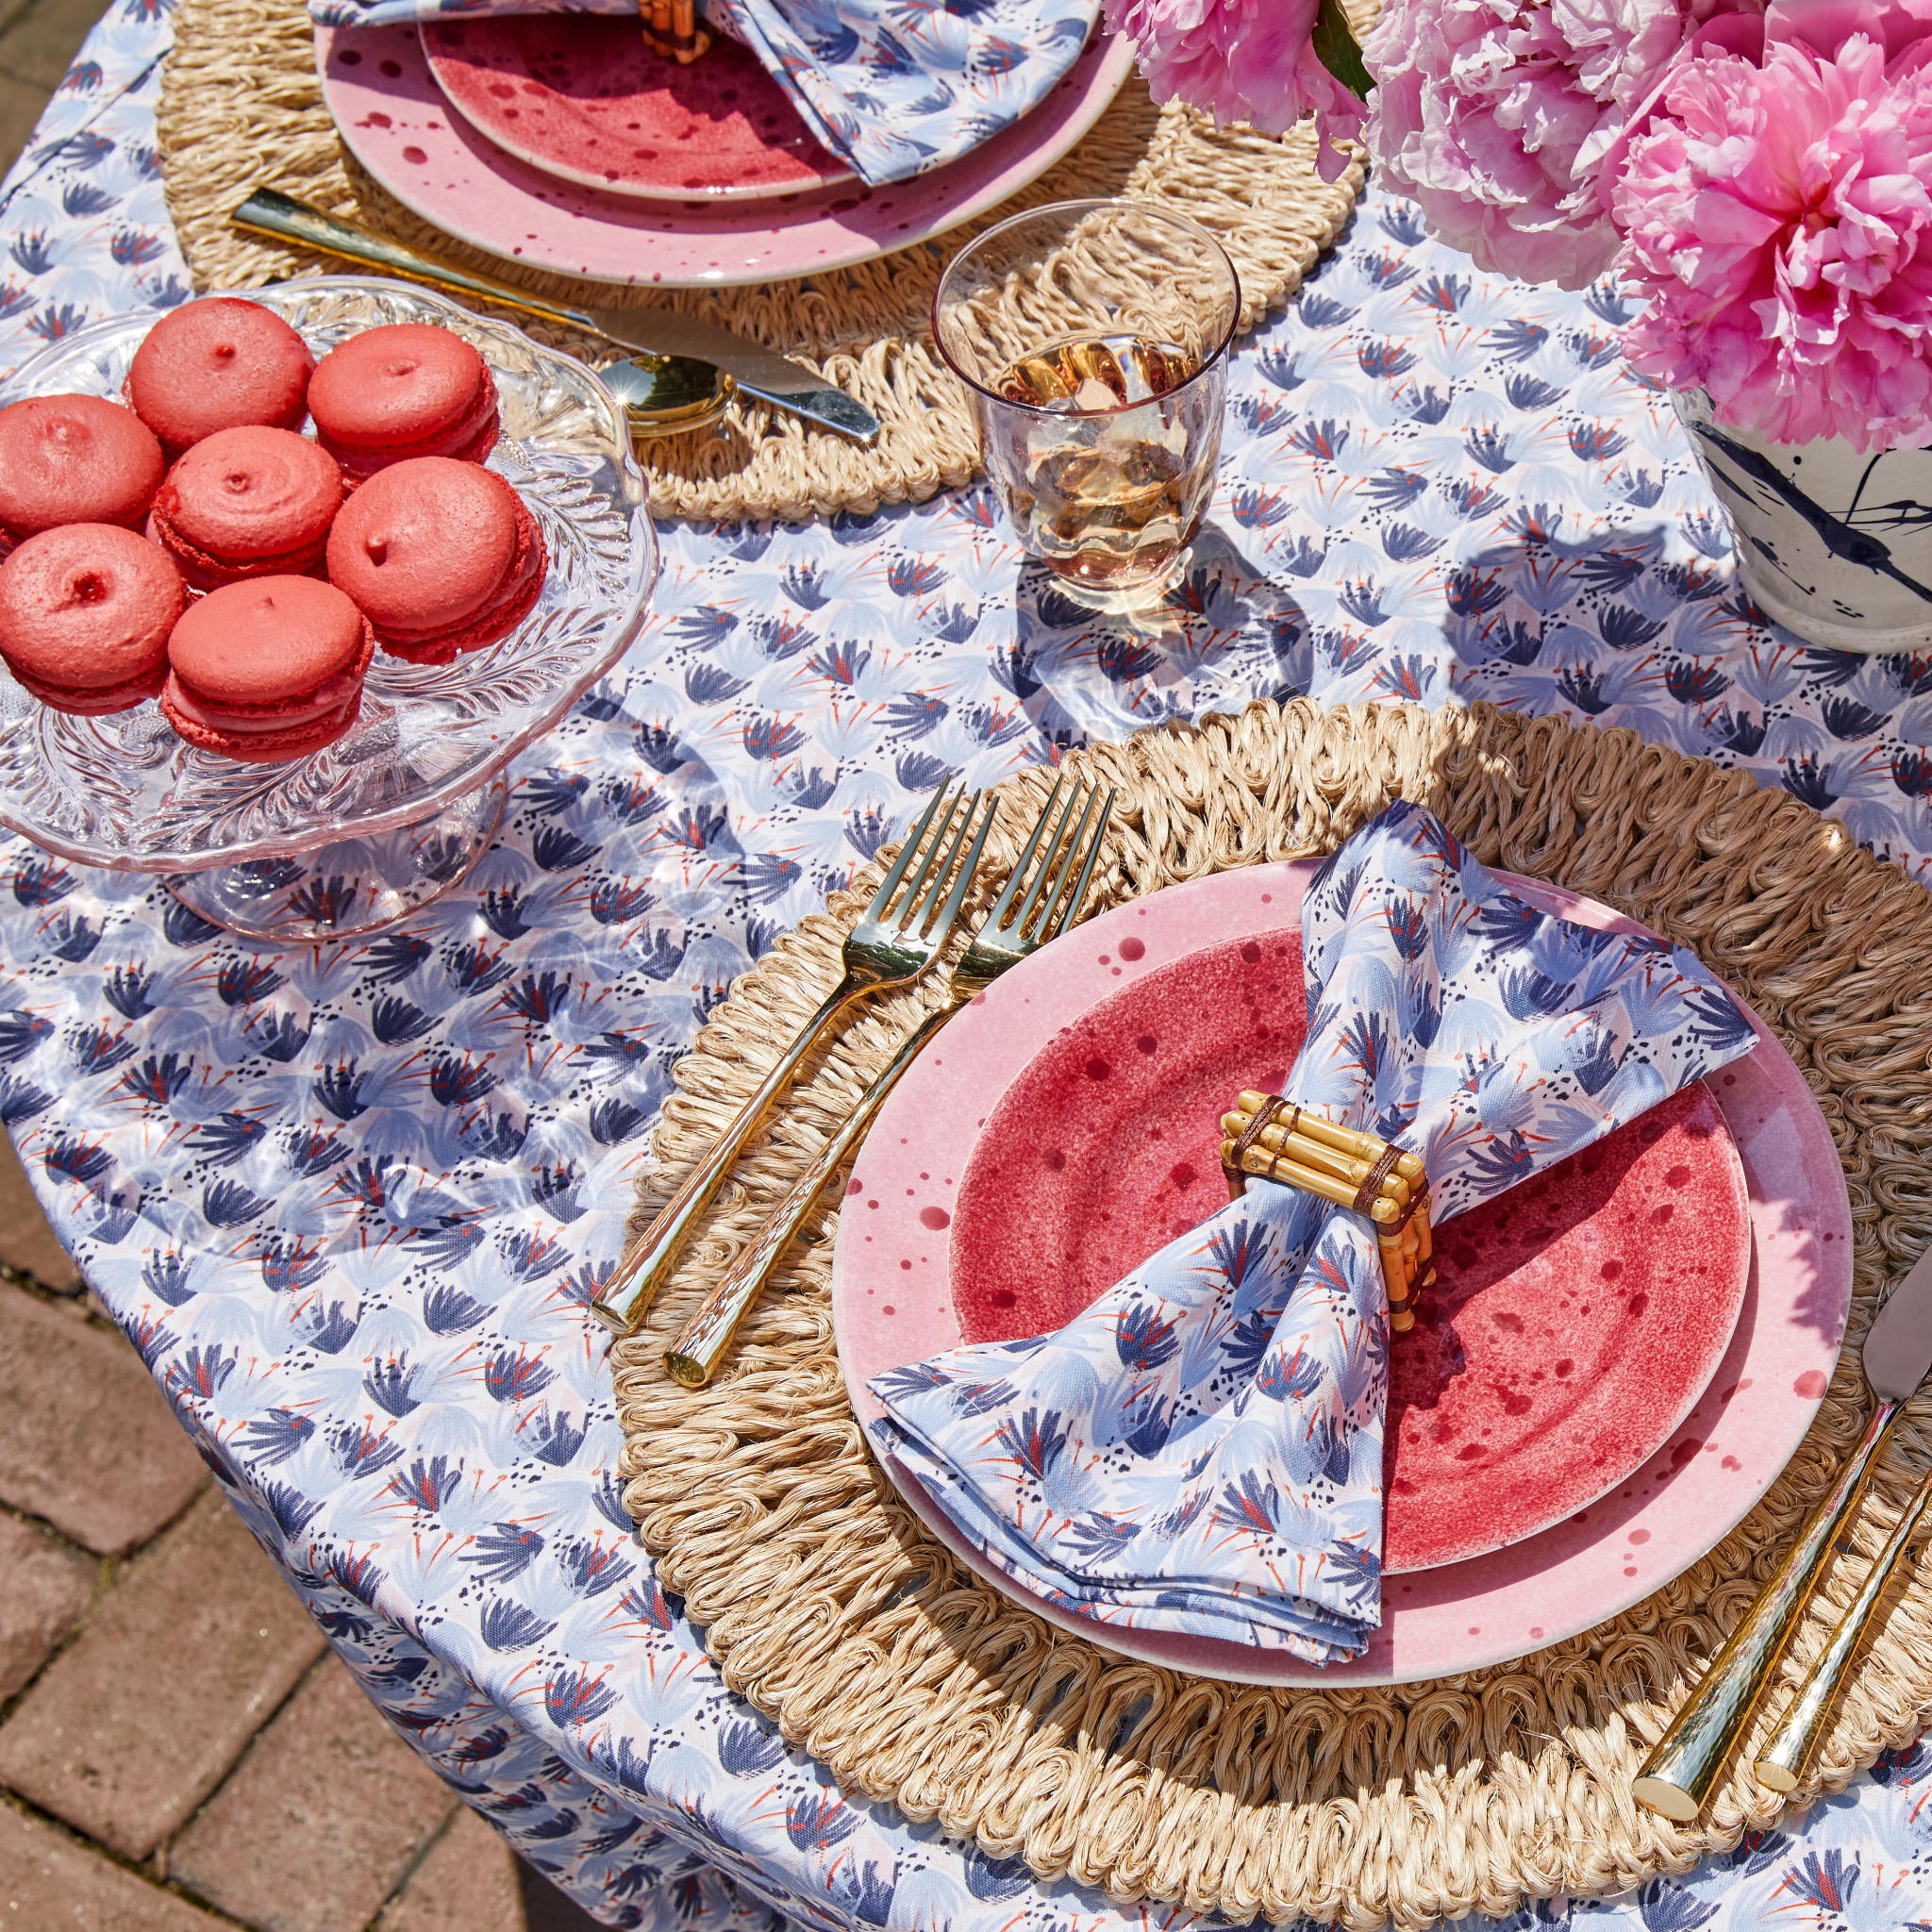 Sky Blue Pattern Printed Tablecloth styled with gold silverware and red and blue printed napkins on top of red and pink plates by seven red macaroons on clear plate